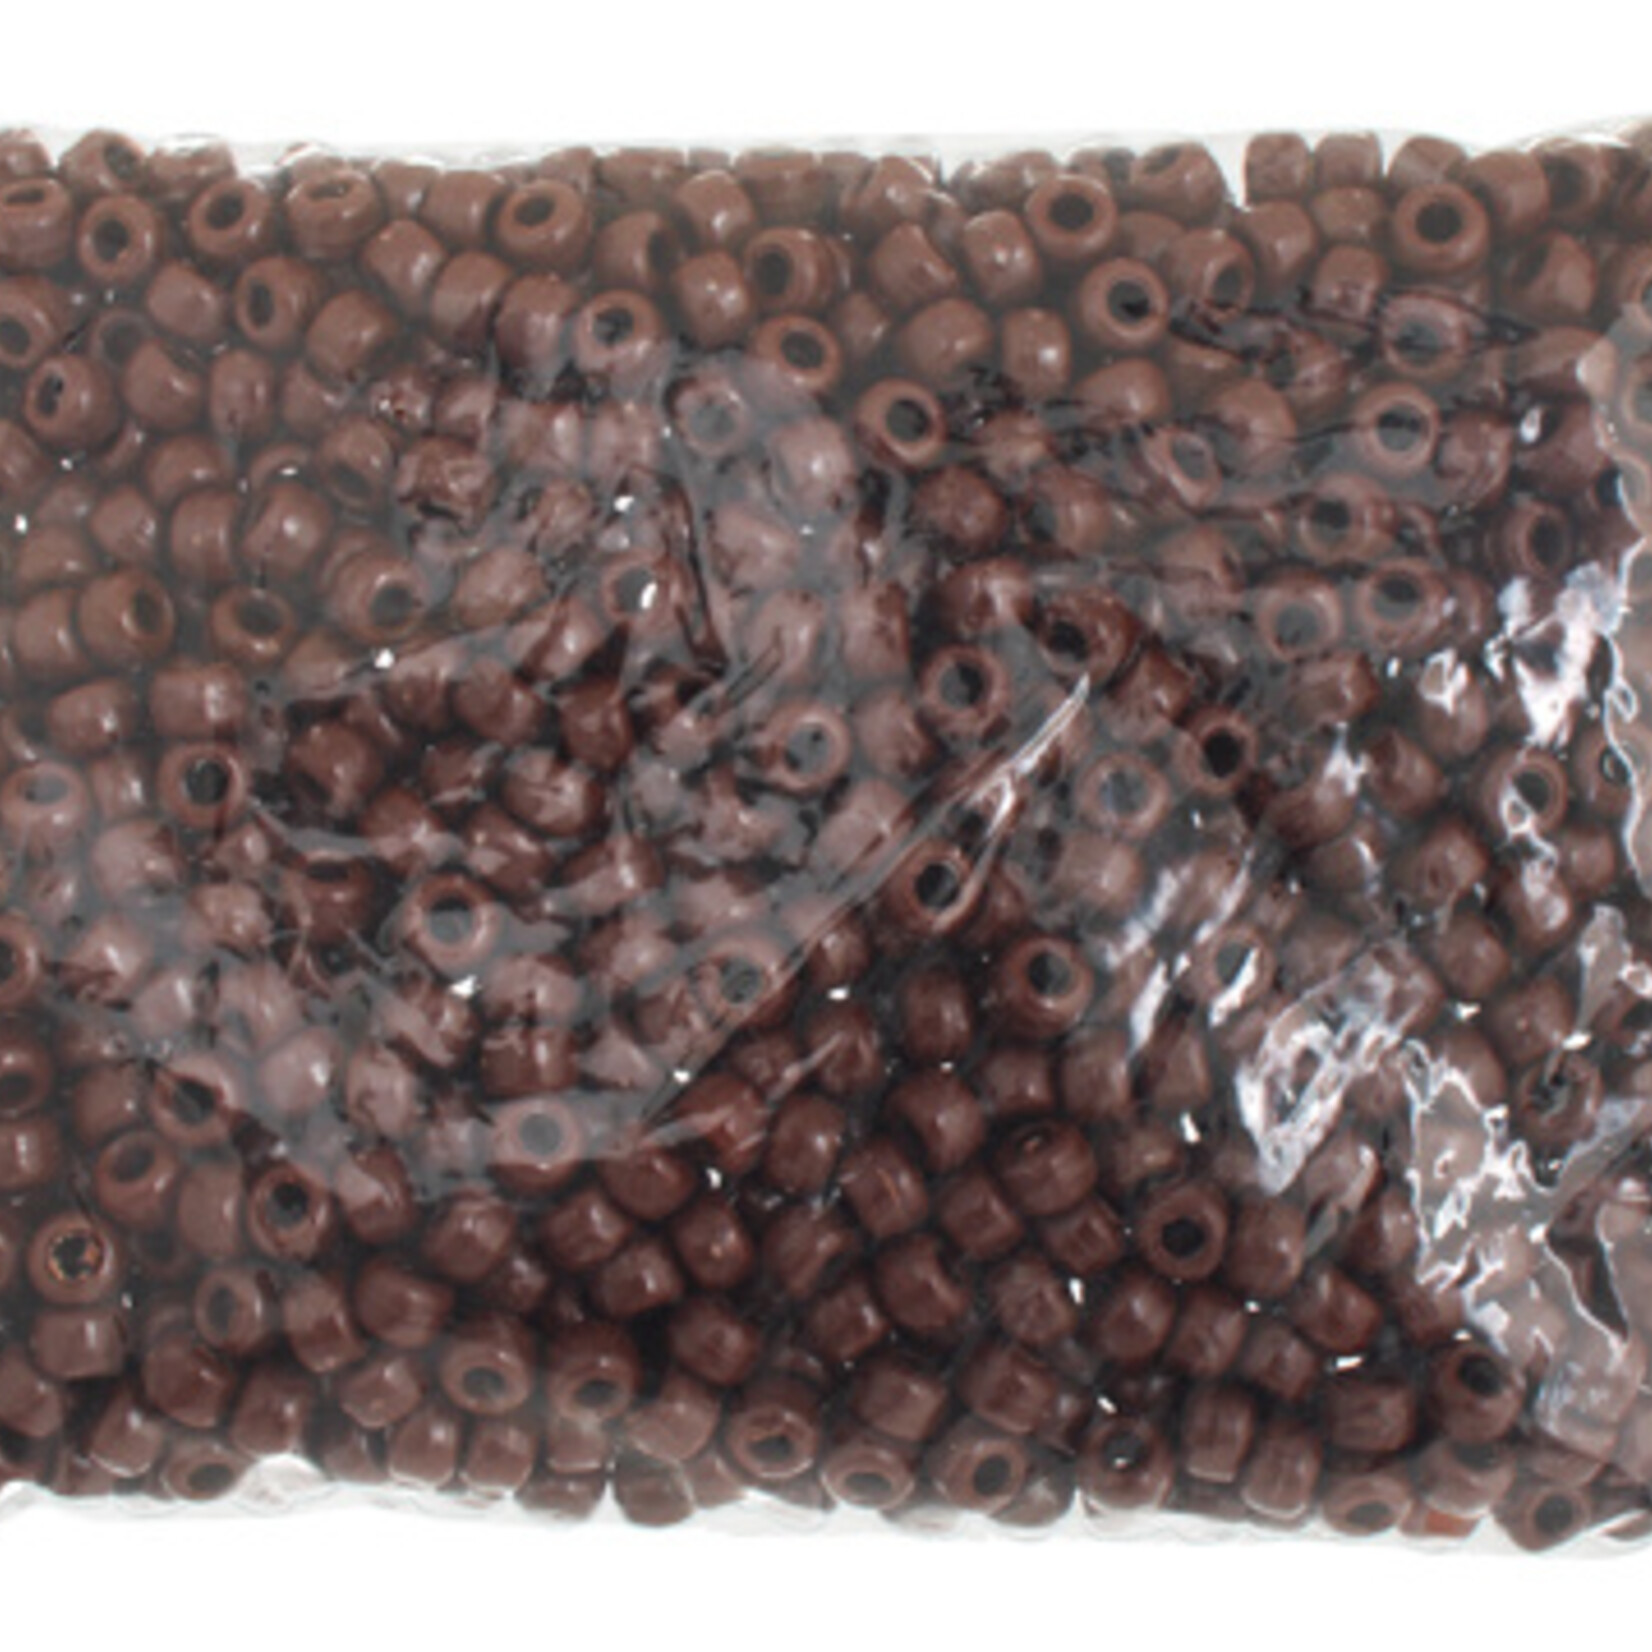 Crowbeads 9mm (1000pcs)  Brown Opaque